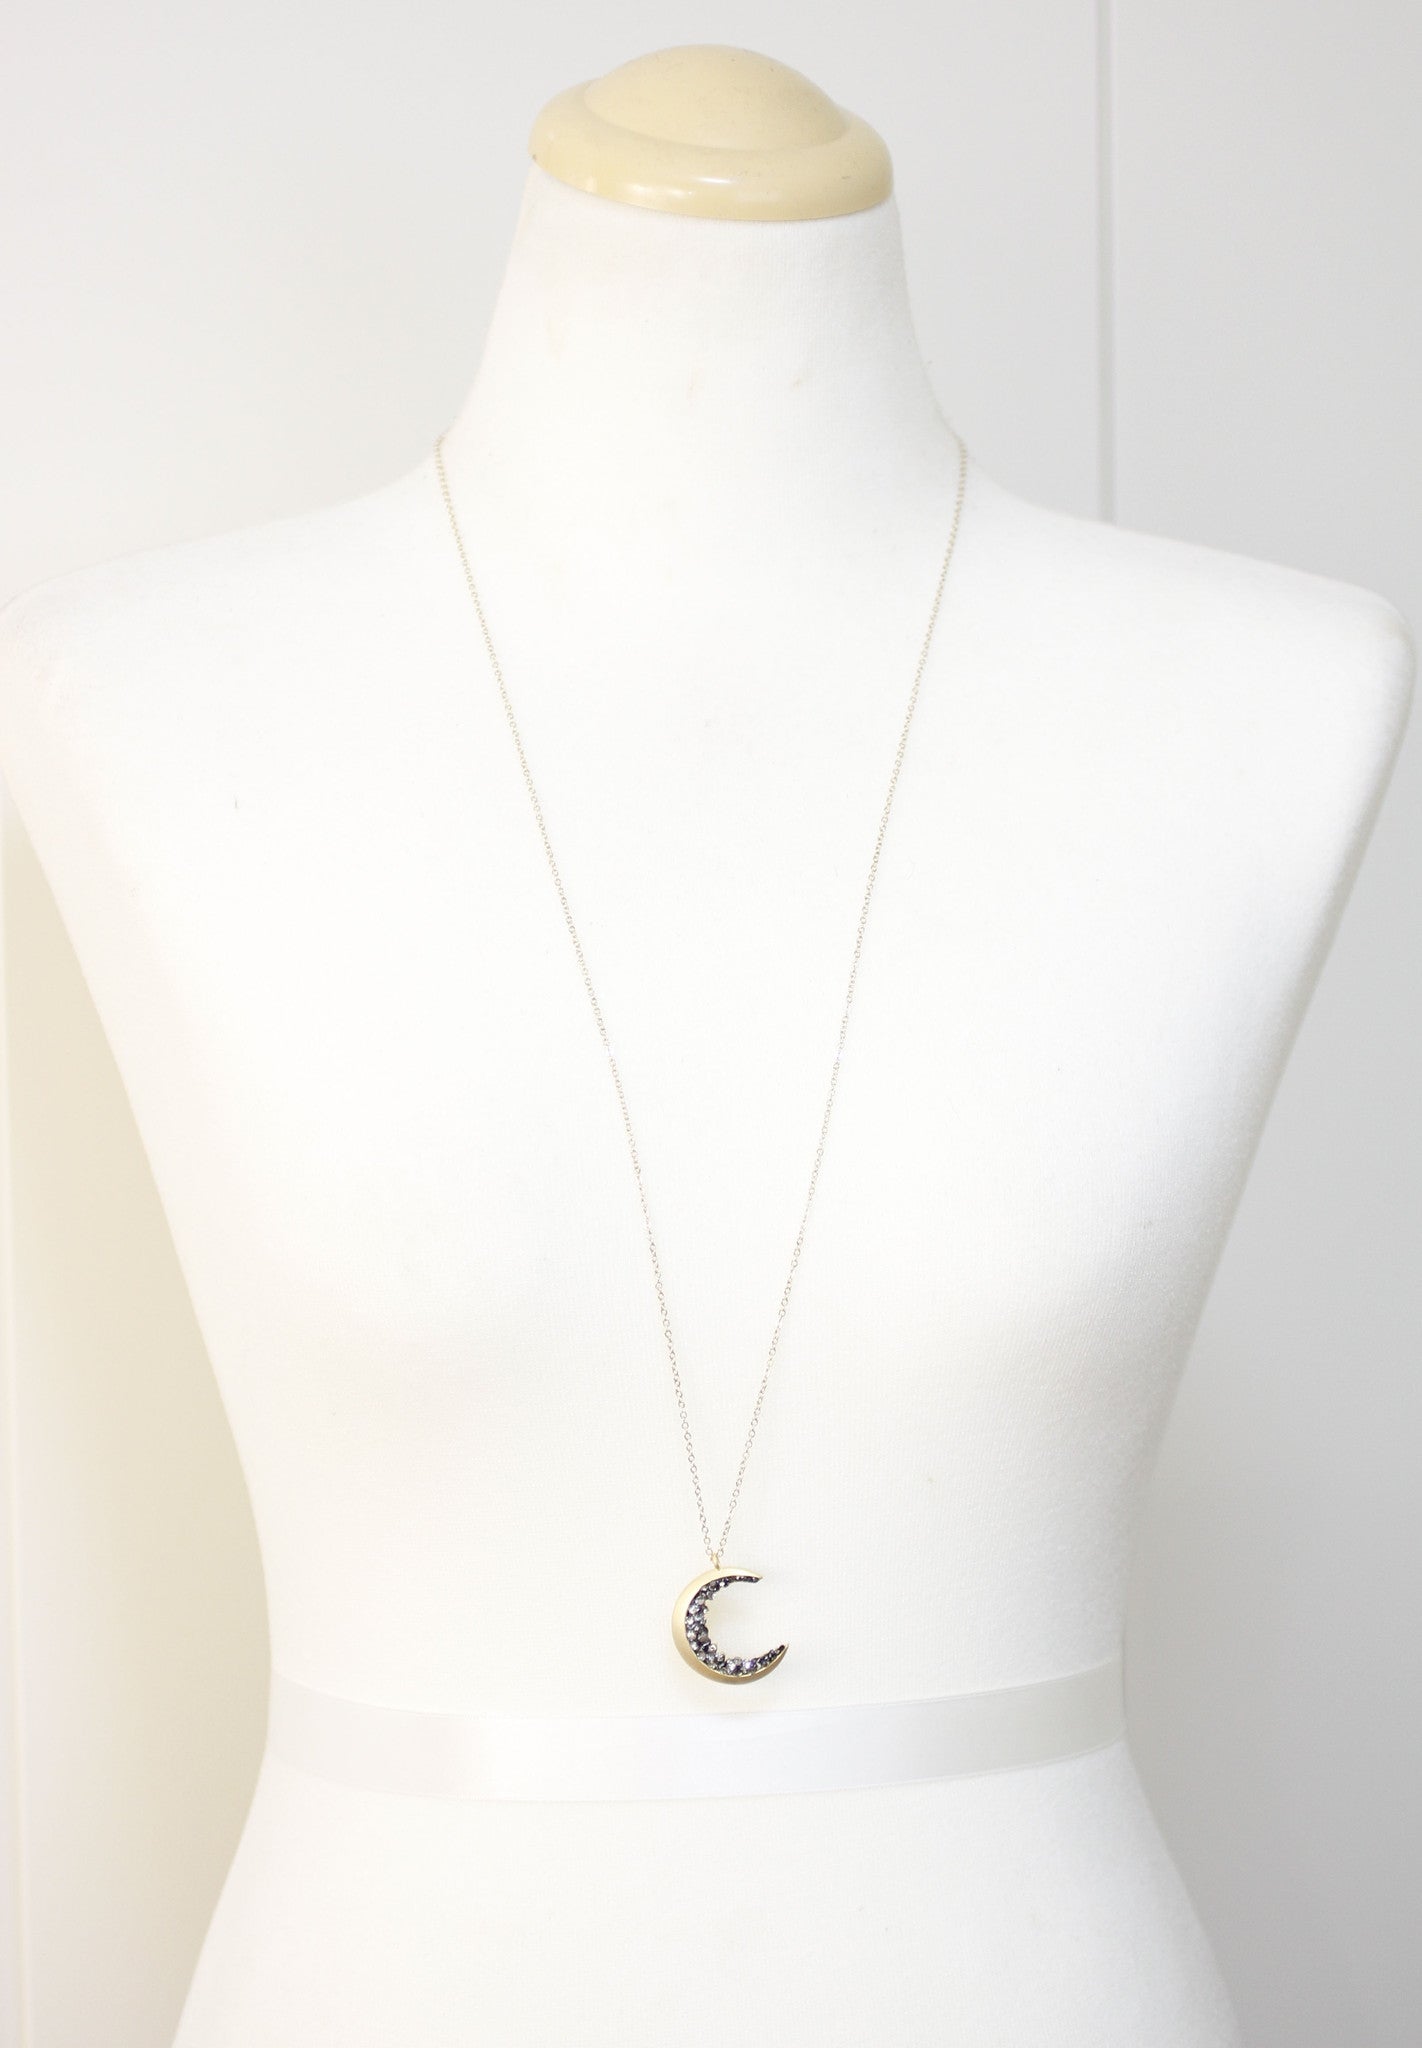 Crescent moon pendant Necklace detailed with Black Diamond Crystals, Long Crescent moon Necklace